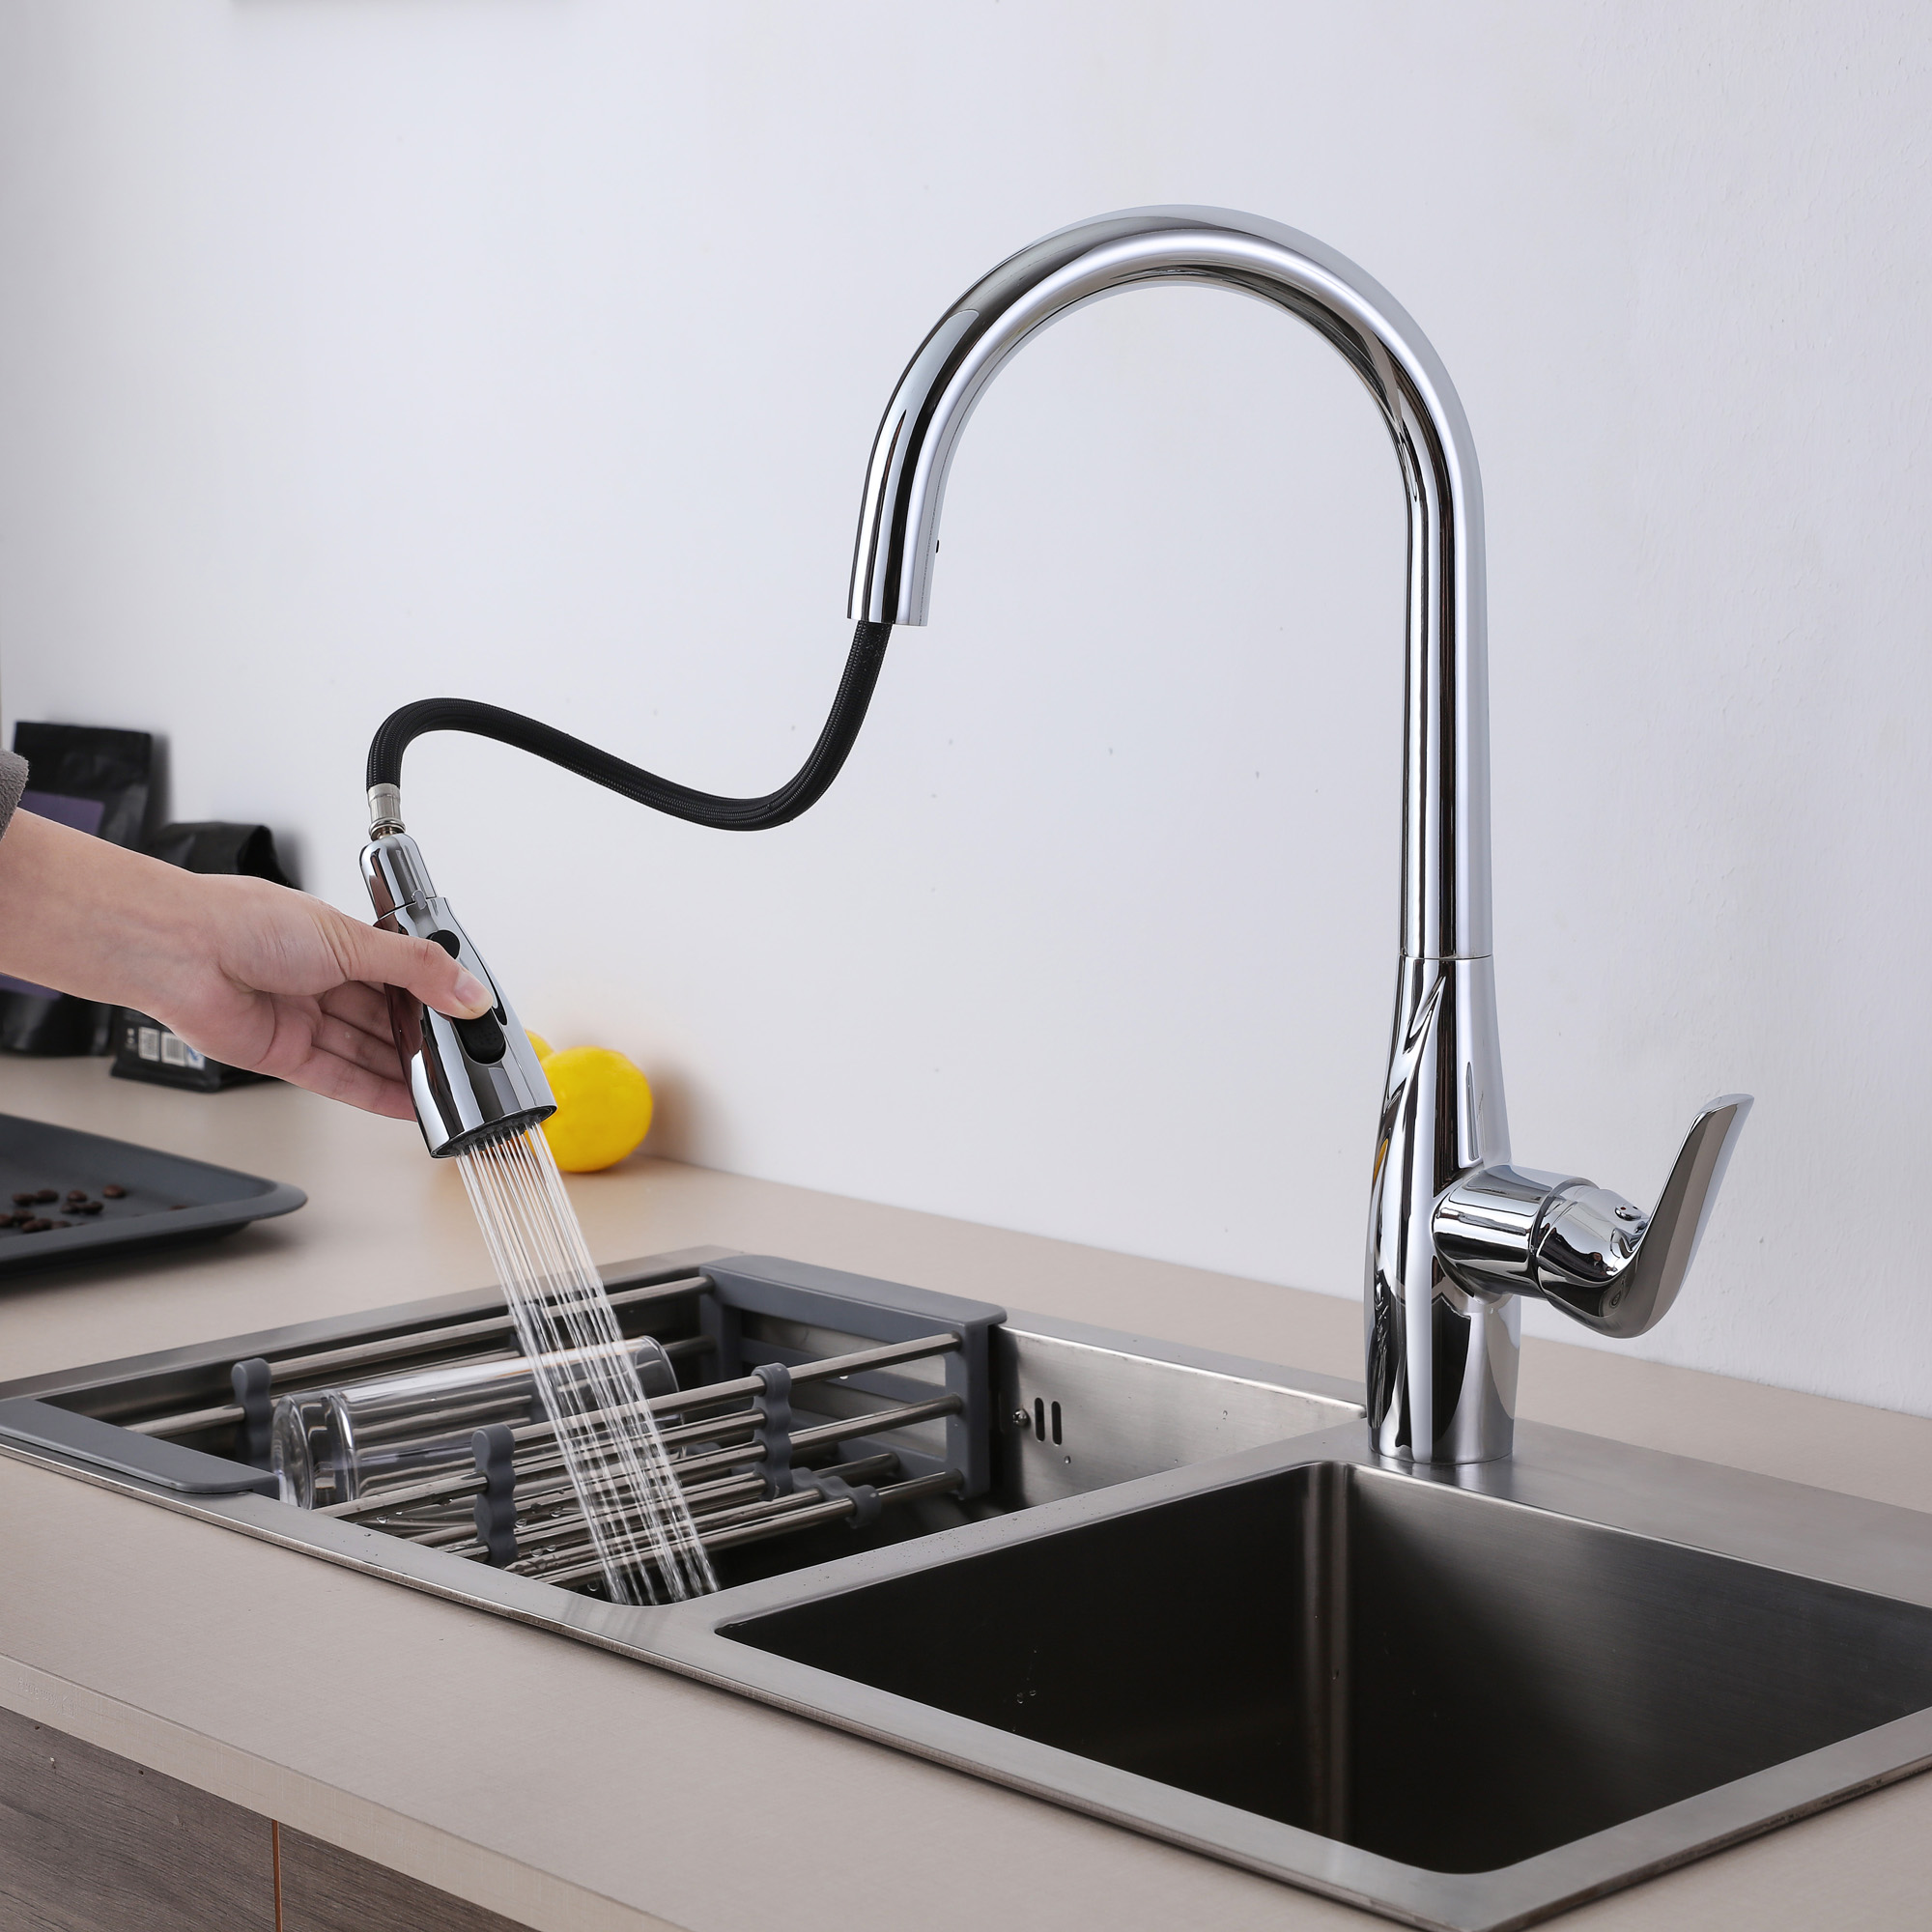 High Quality ABS Spray Brass Single Handle Kitchen Mixer Tap